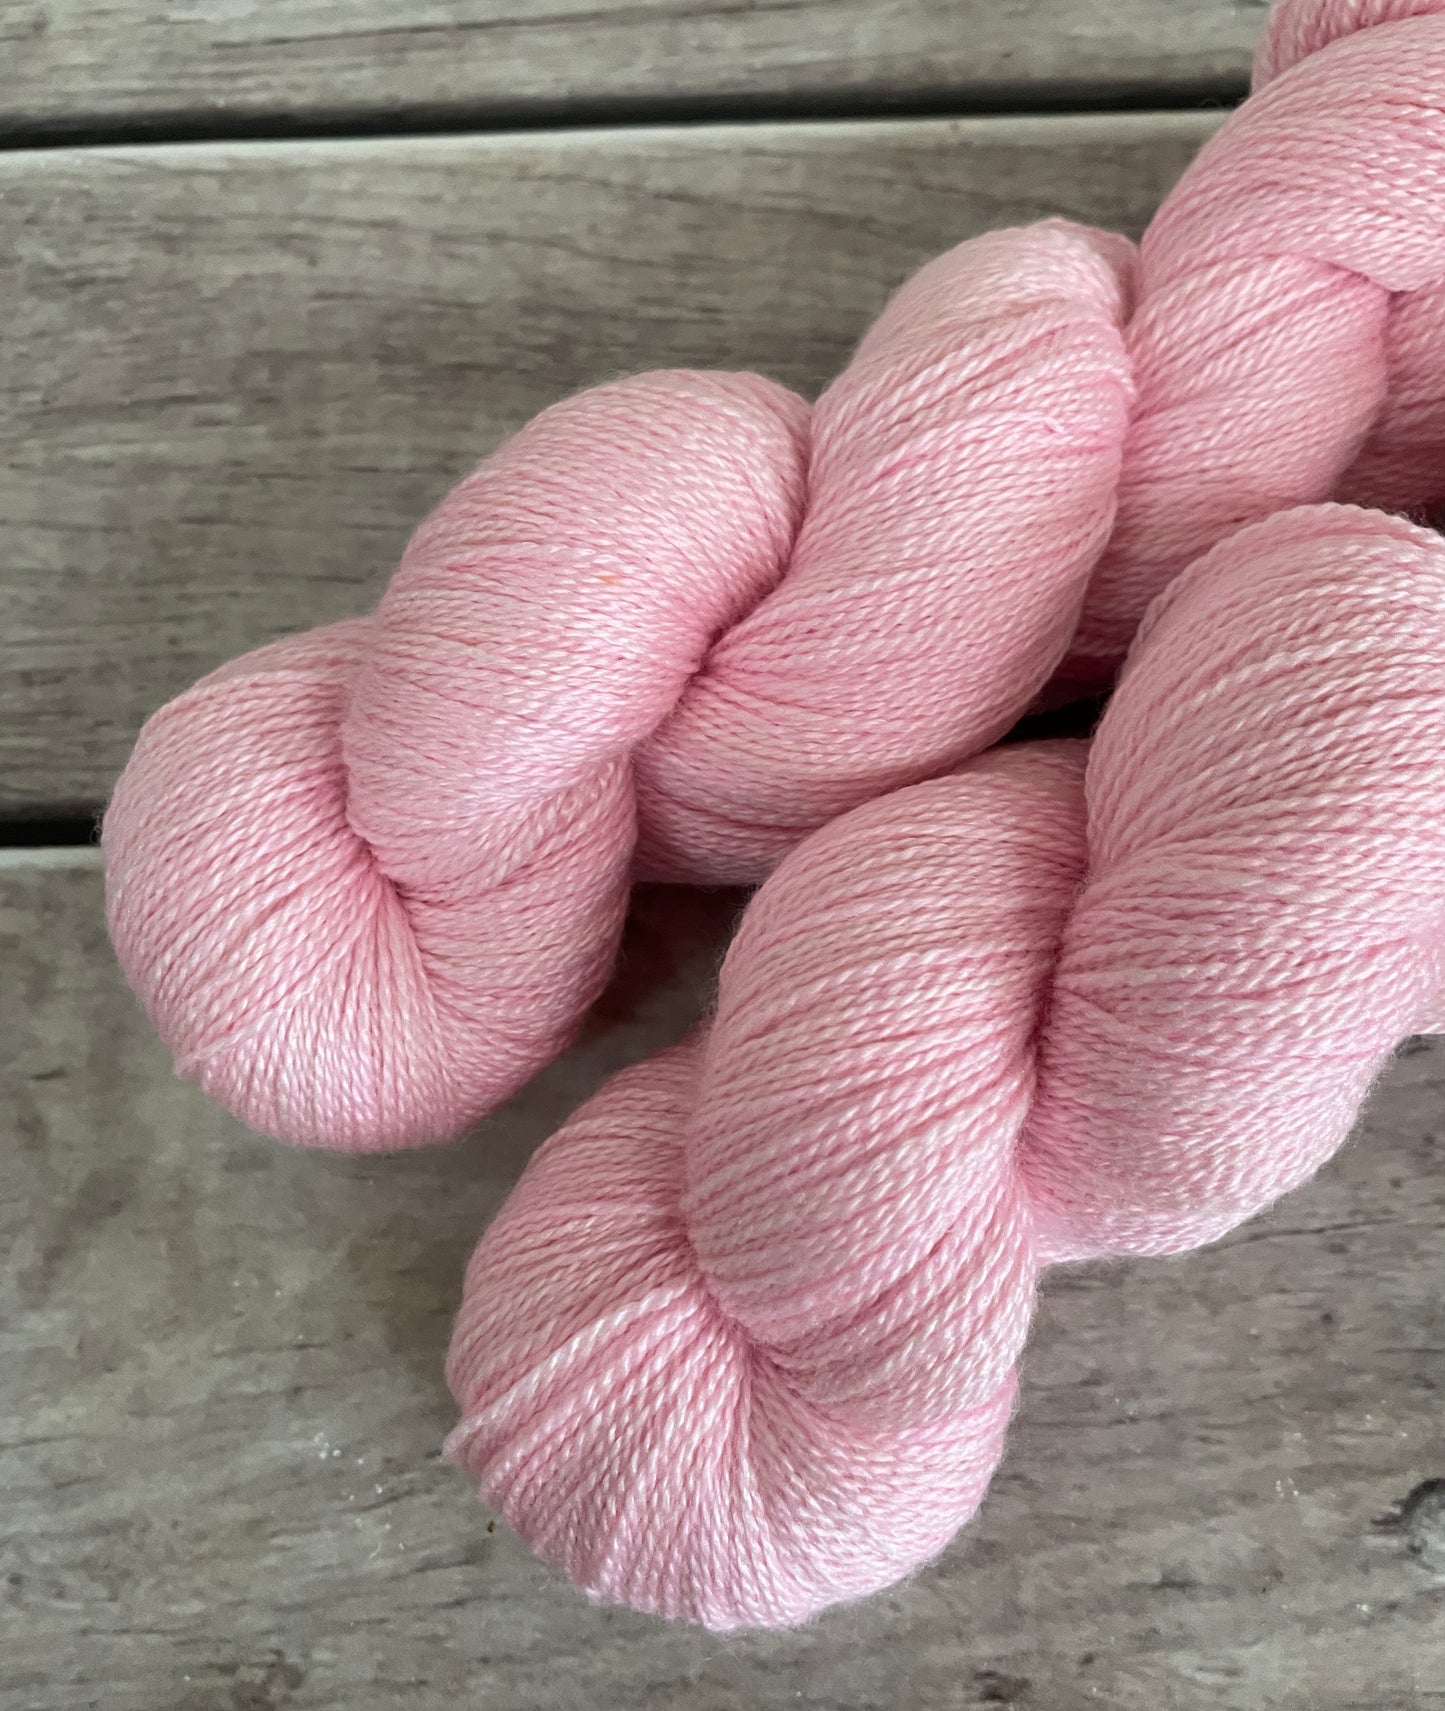 China Doll - 3 ply in Mulberry silk and BFL